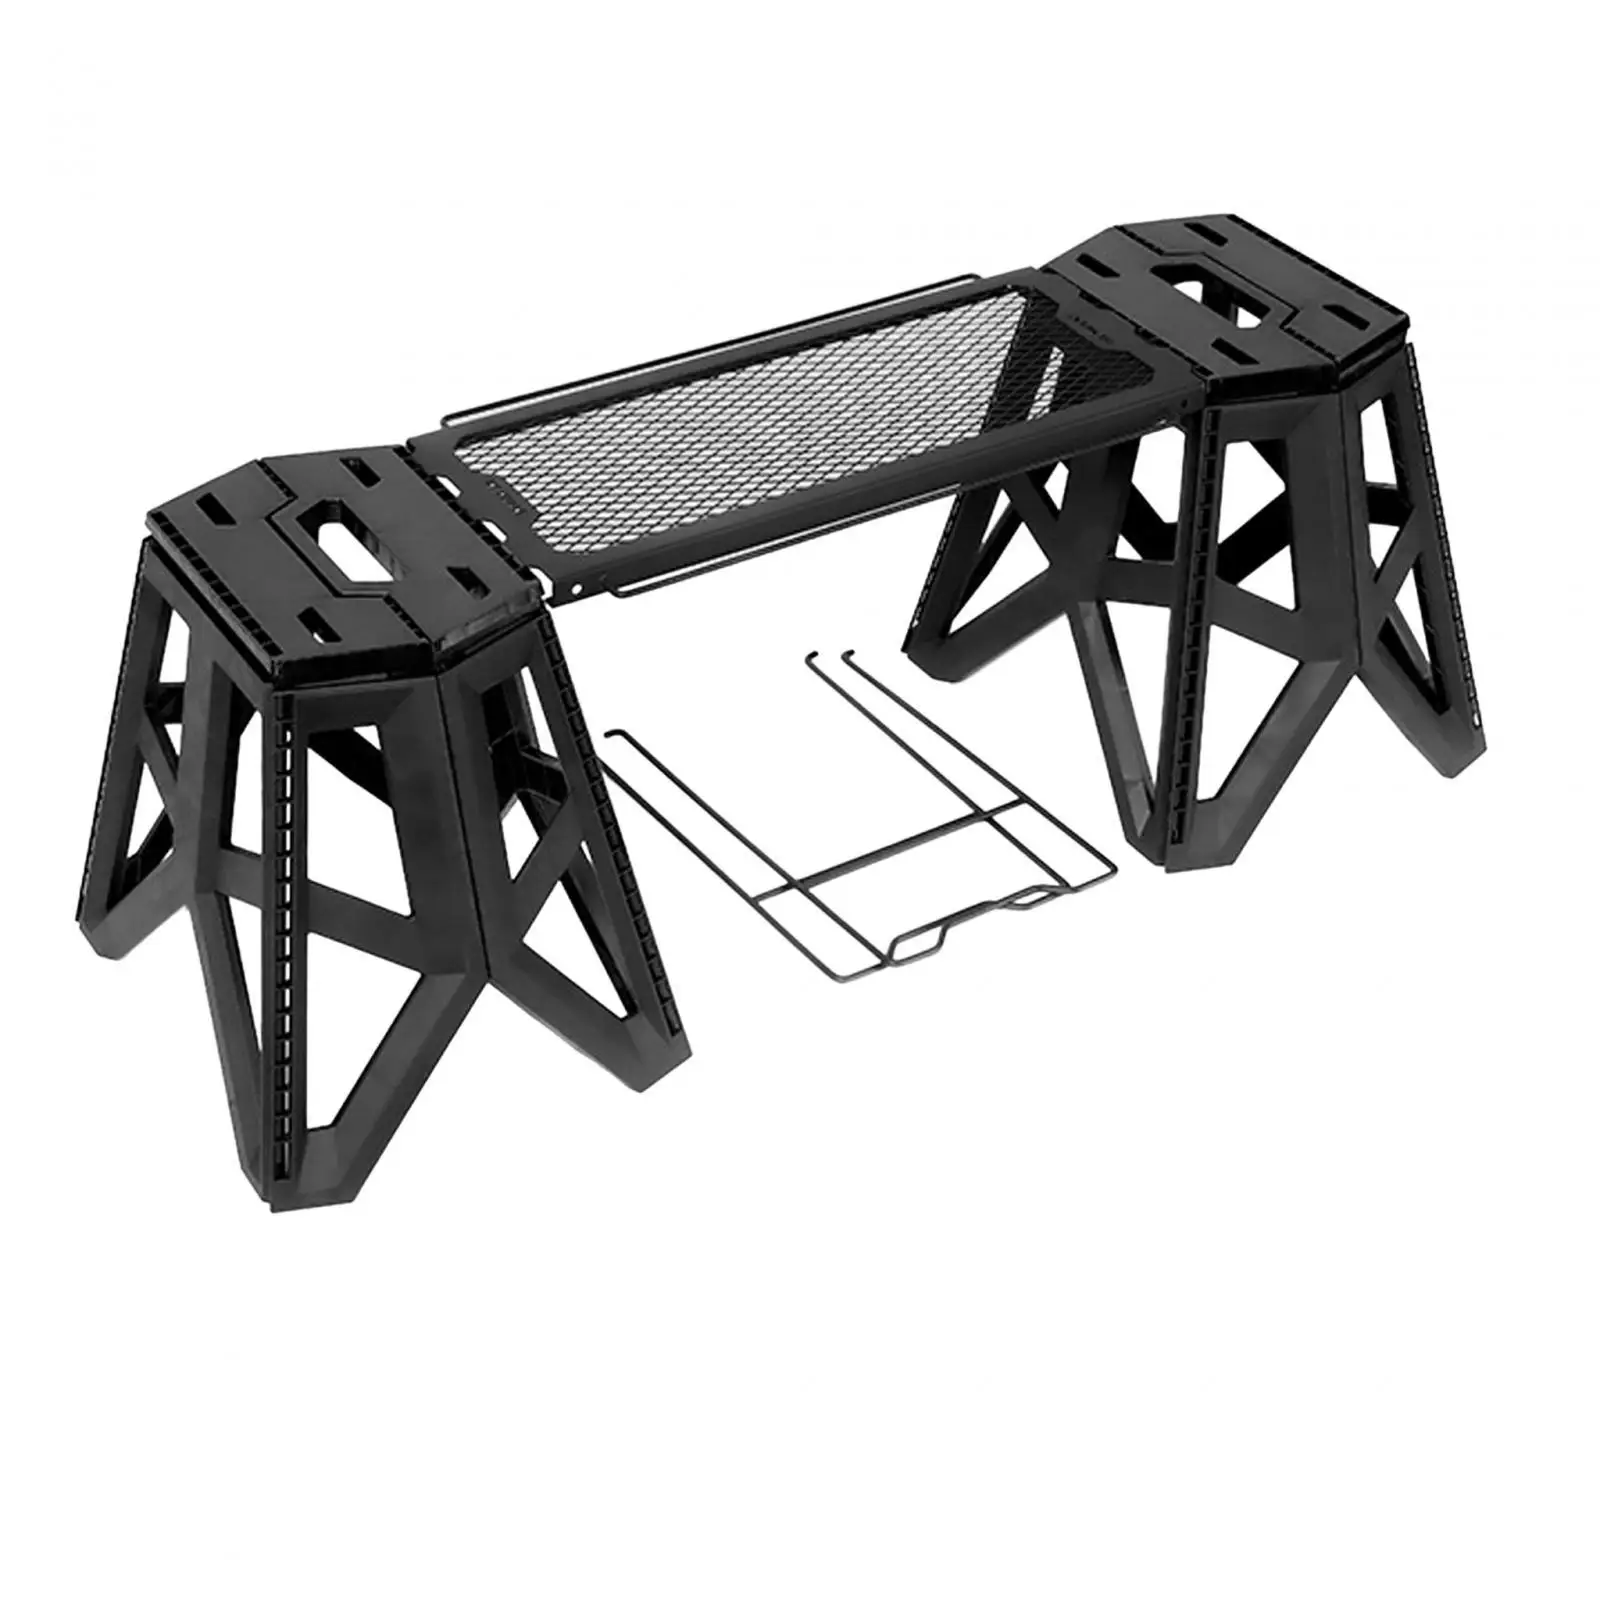 Camping Table and Stool Set Portable Foldable Multifunctional Folding Table